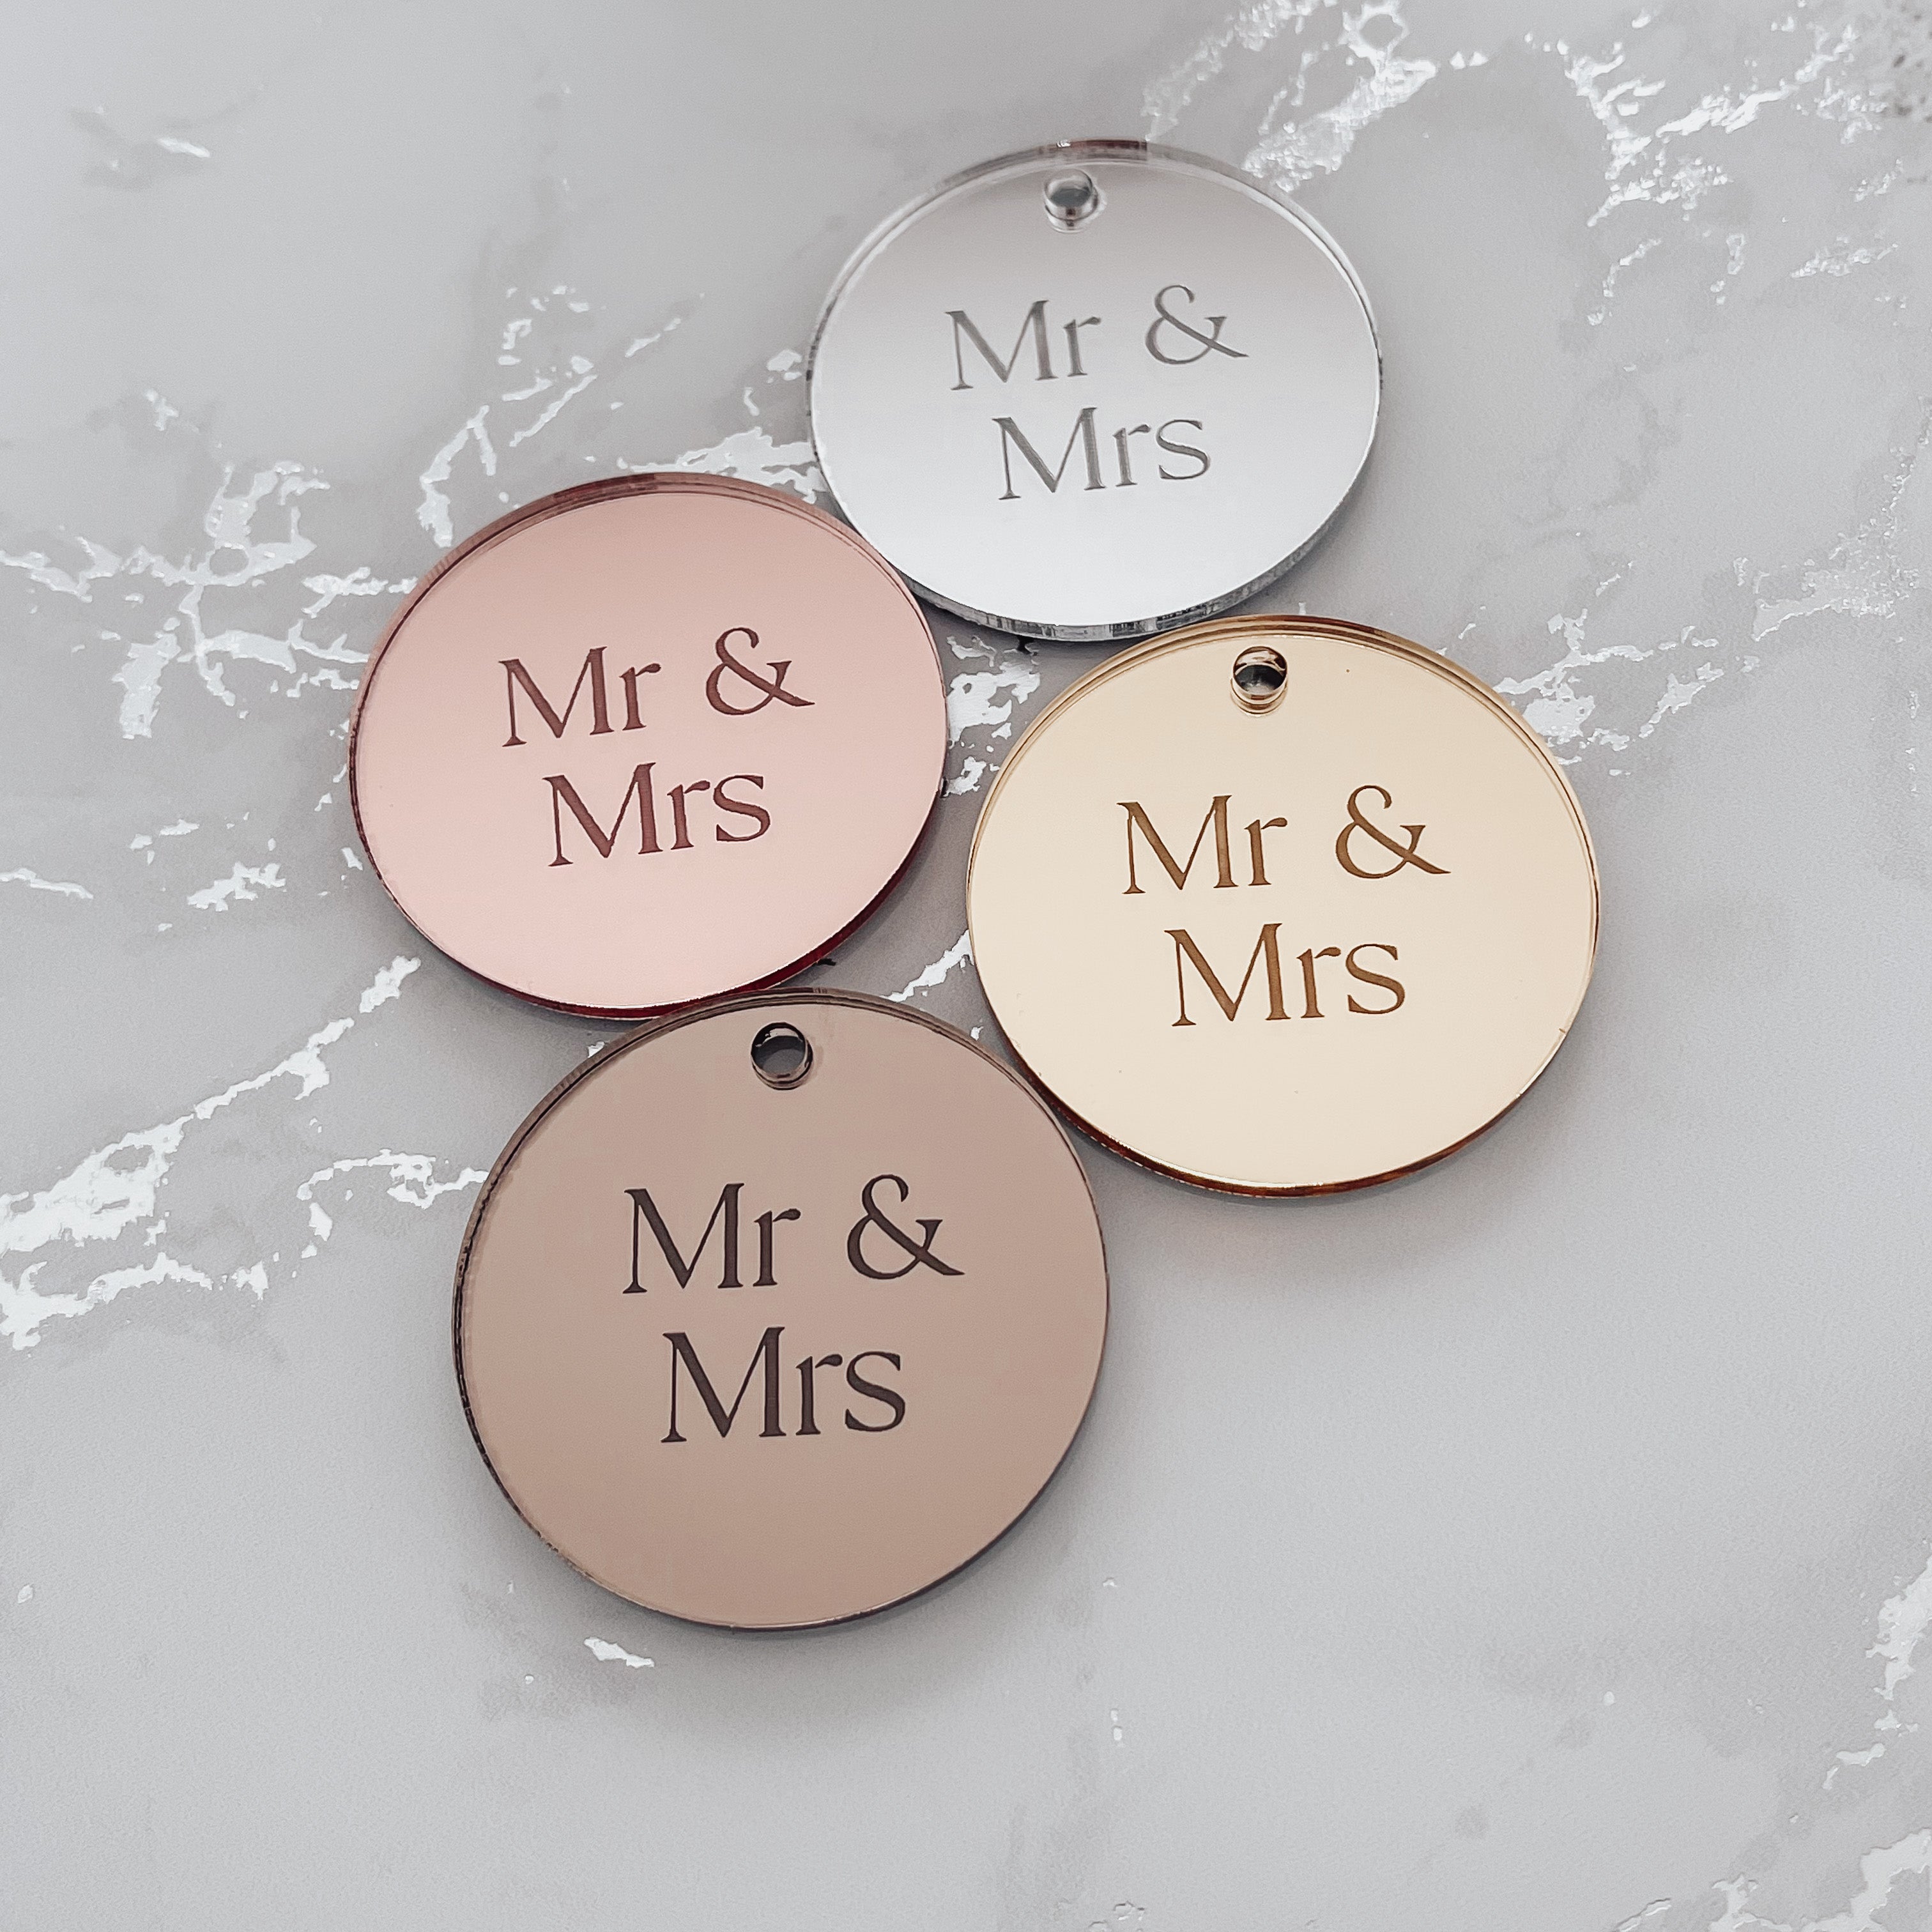 Mr & Mrs Cupcake Toppers